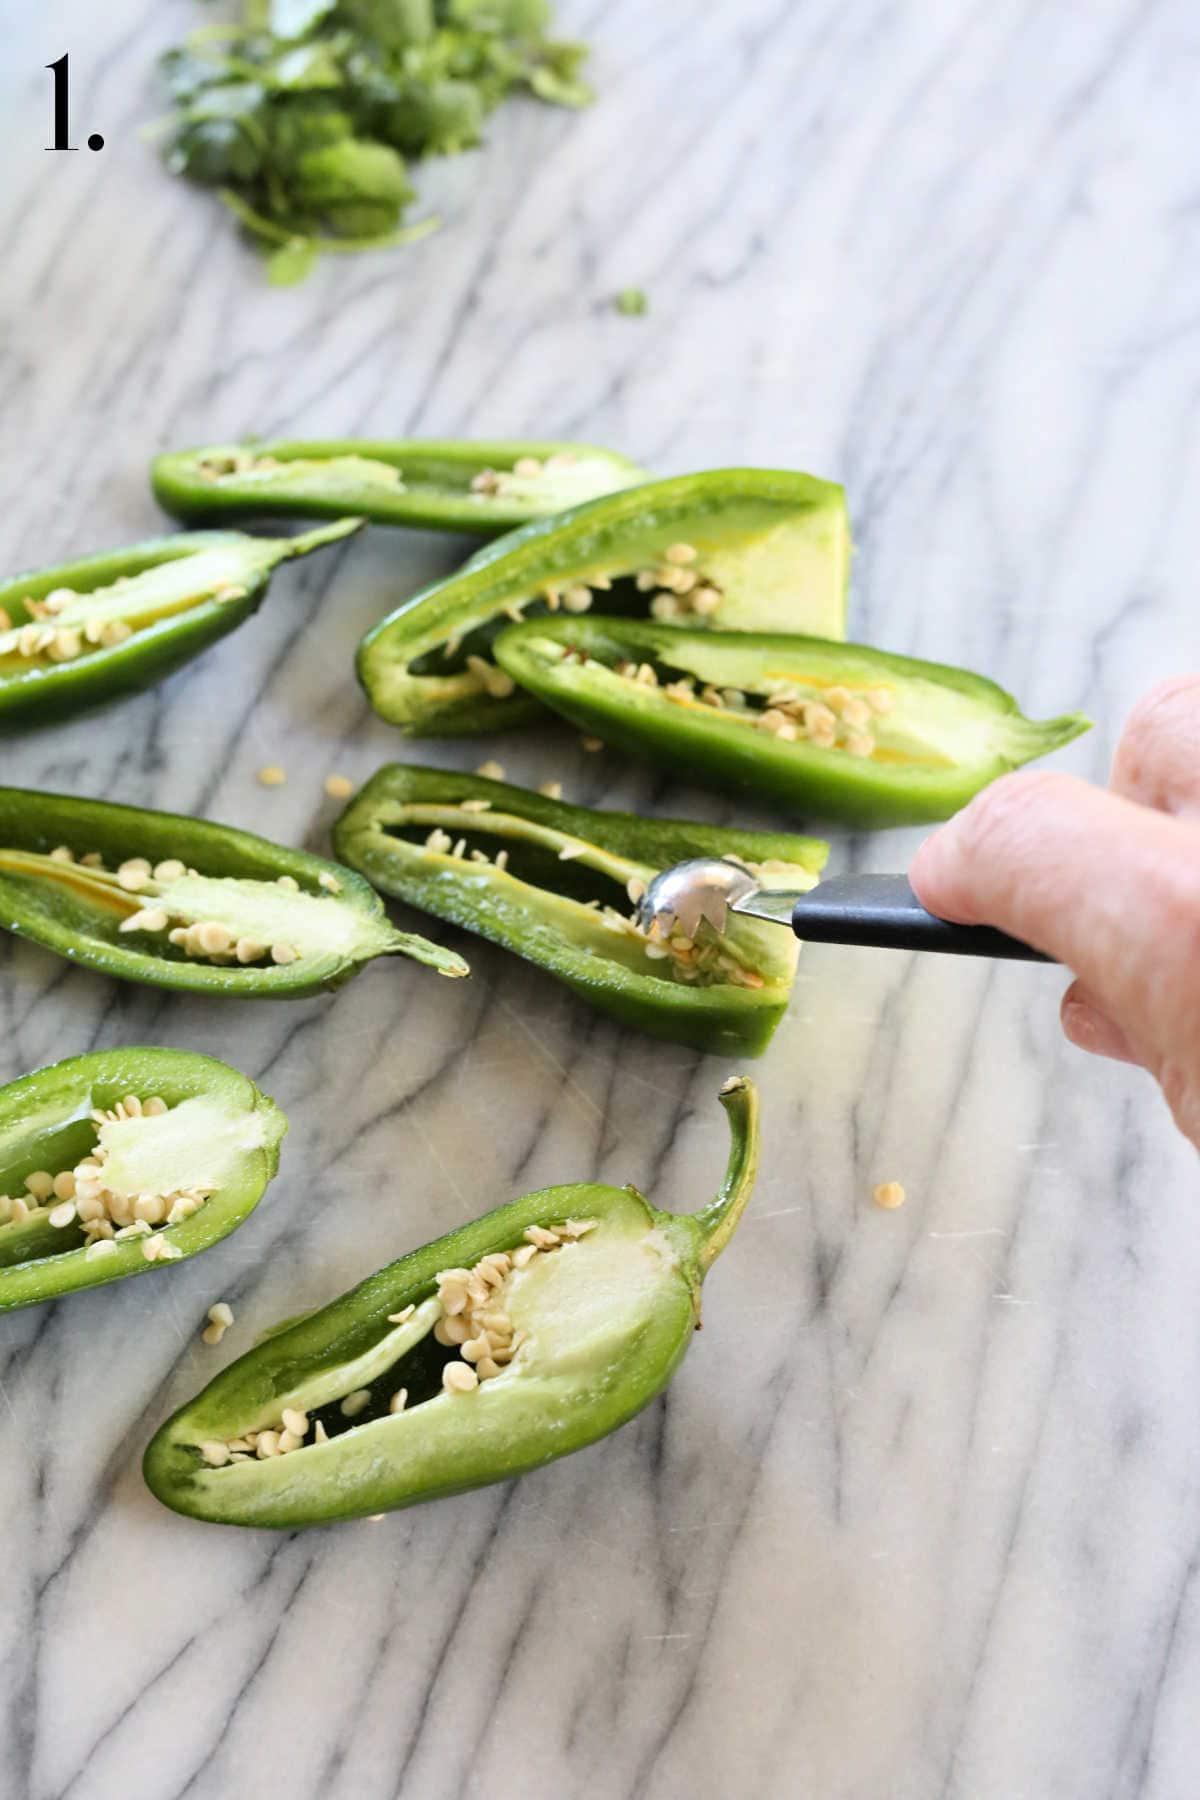 Jalapeno halves with hand scooping out the seeds.